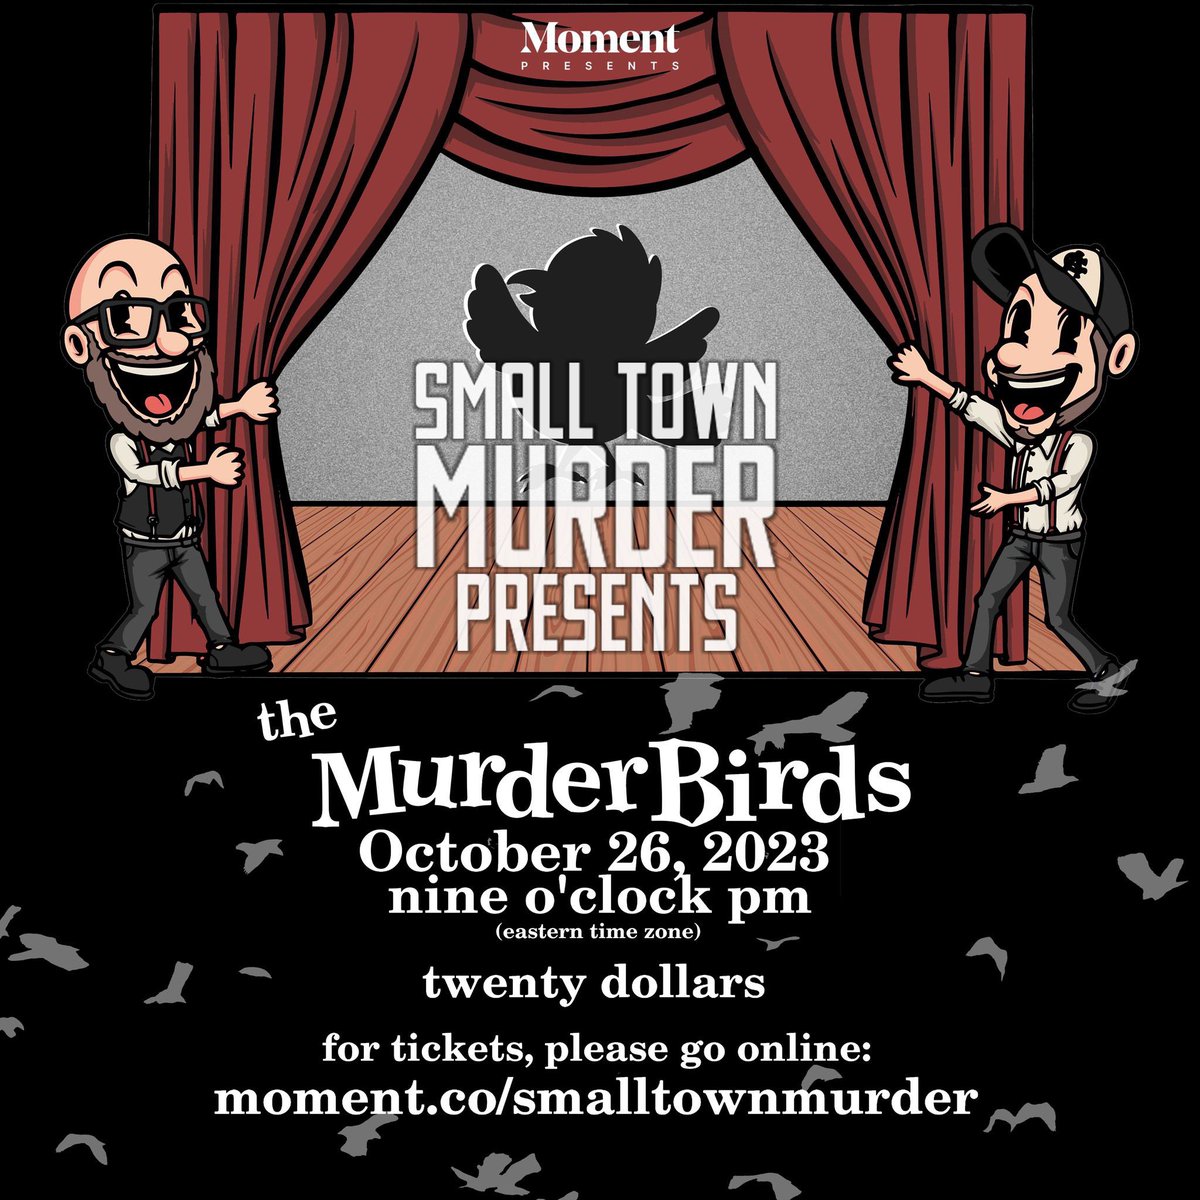 Good evening, ladies and gentlemen; and welcome to Small Town Murder Presents:

Join us in your living room on October 26, 2023 at 9 PM EST. 

Tickets are $20. The video will be available to playback for 7 days after the event. 

moment.co/smalltownmurder